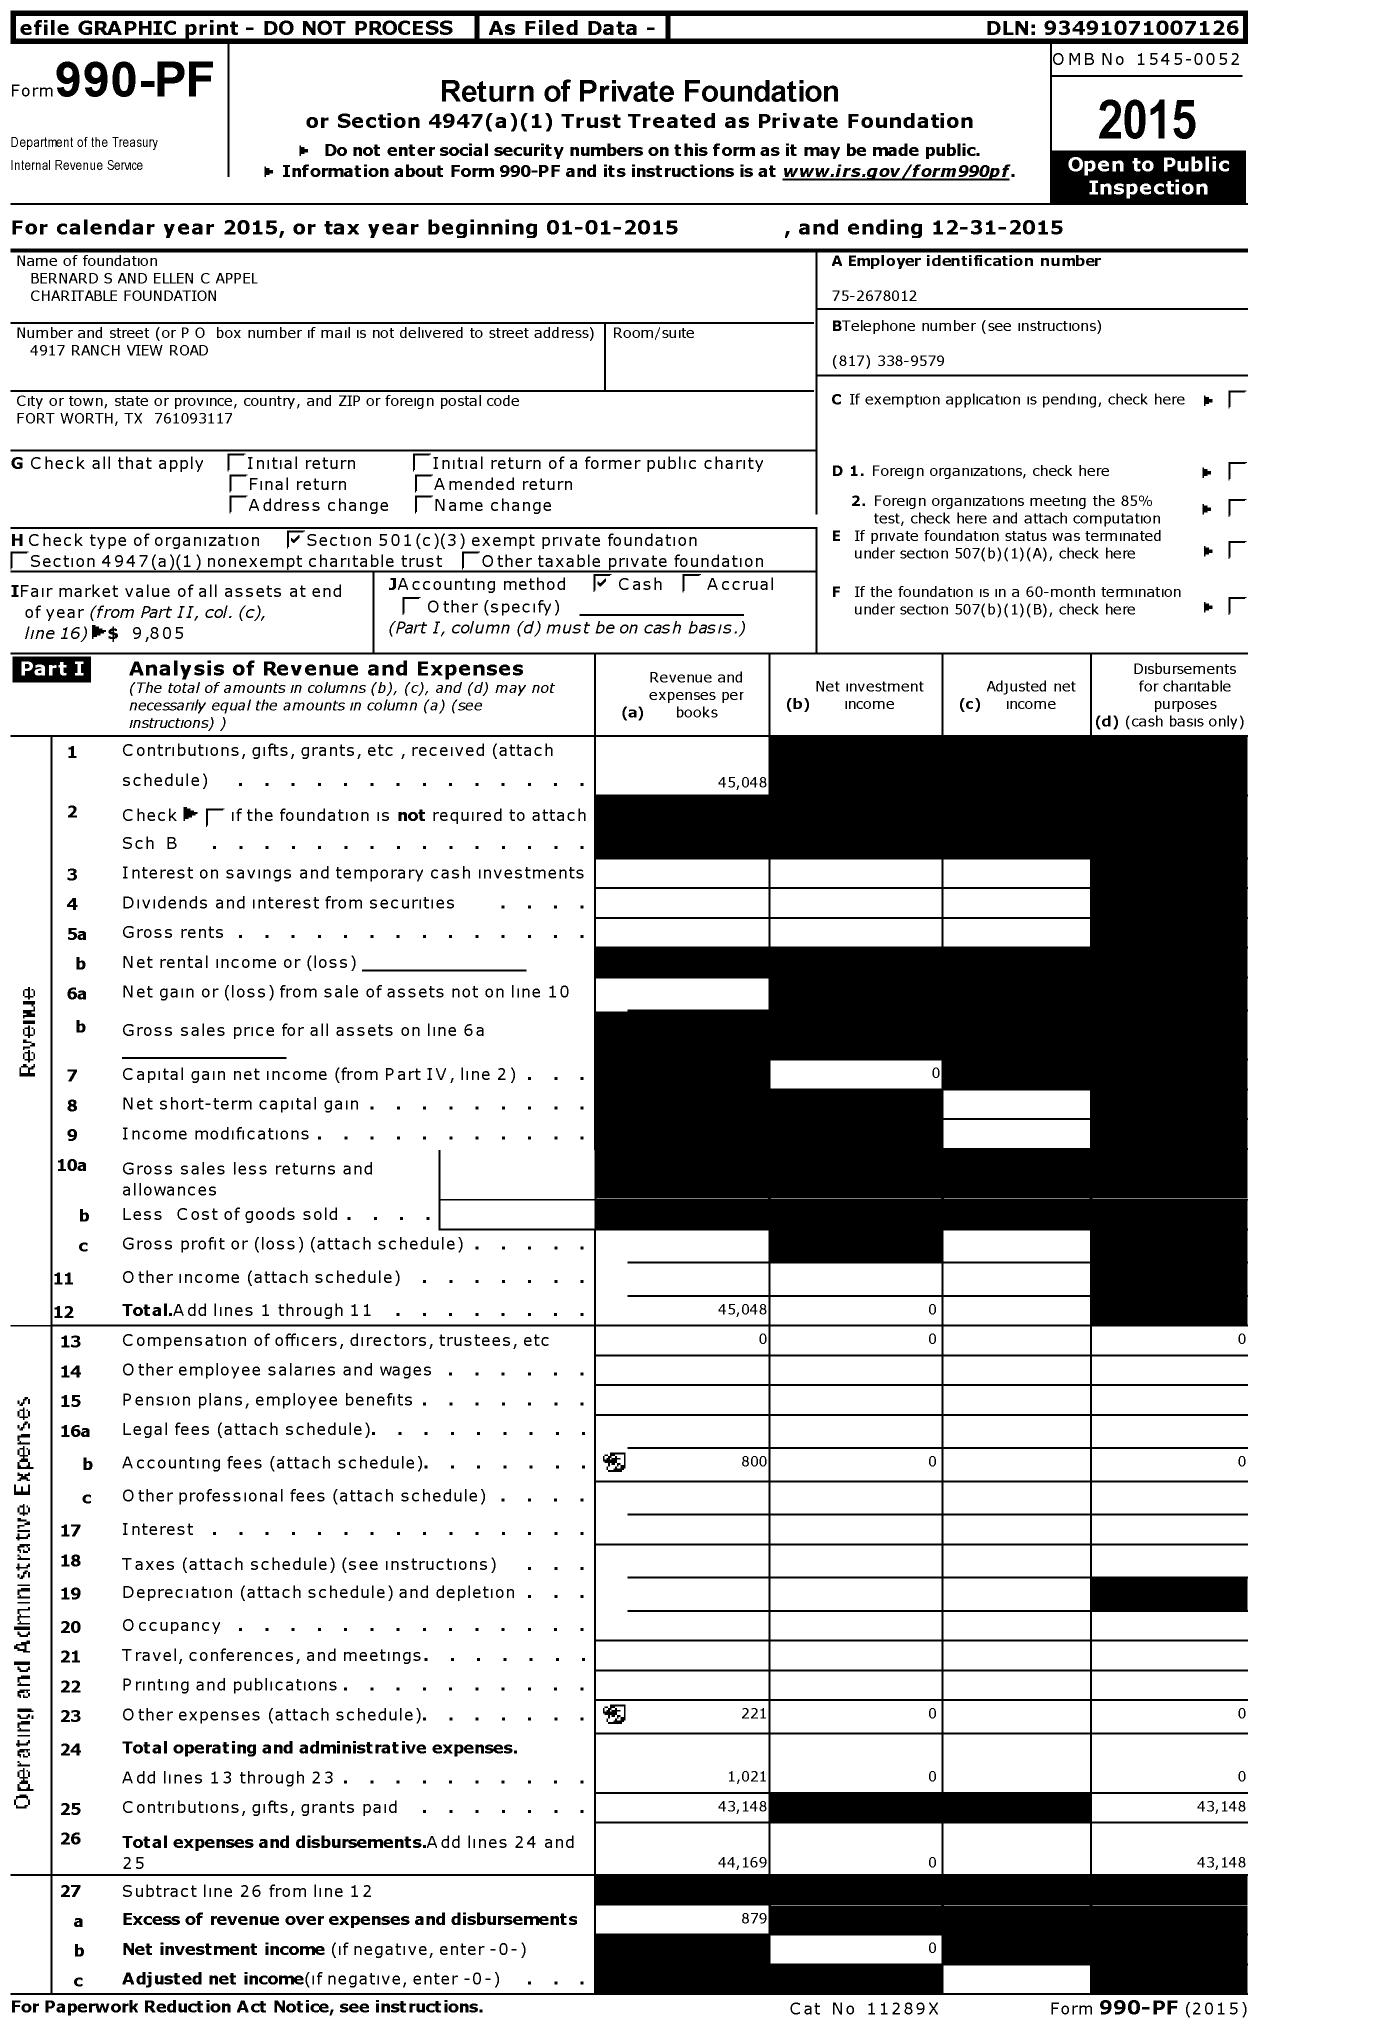 Image of first page of 2015 Form 990PF for Bernard S and Ellen C Appel Charitable Foundation